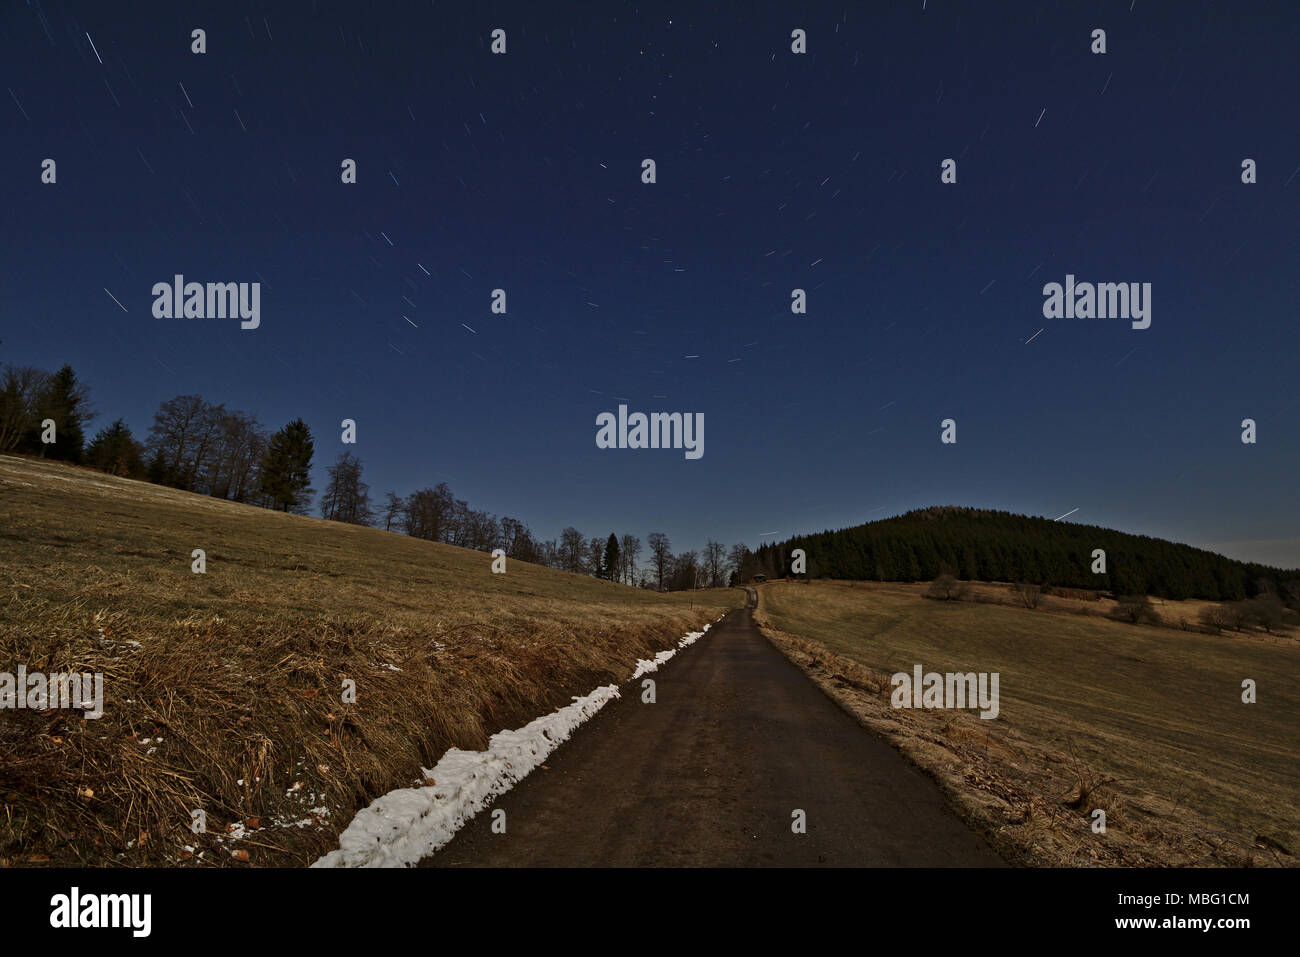 Starry night sky with star trails rotating around the North Star above a single lane road leading through fields Stock Photo